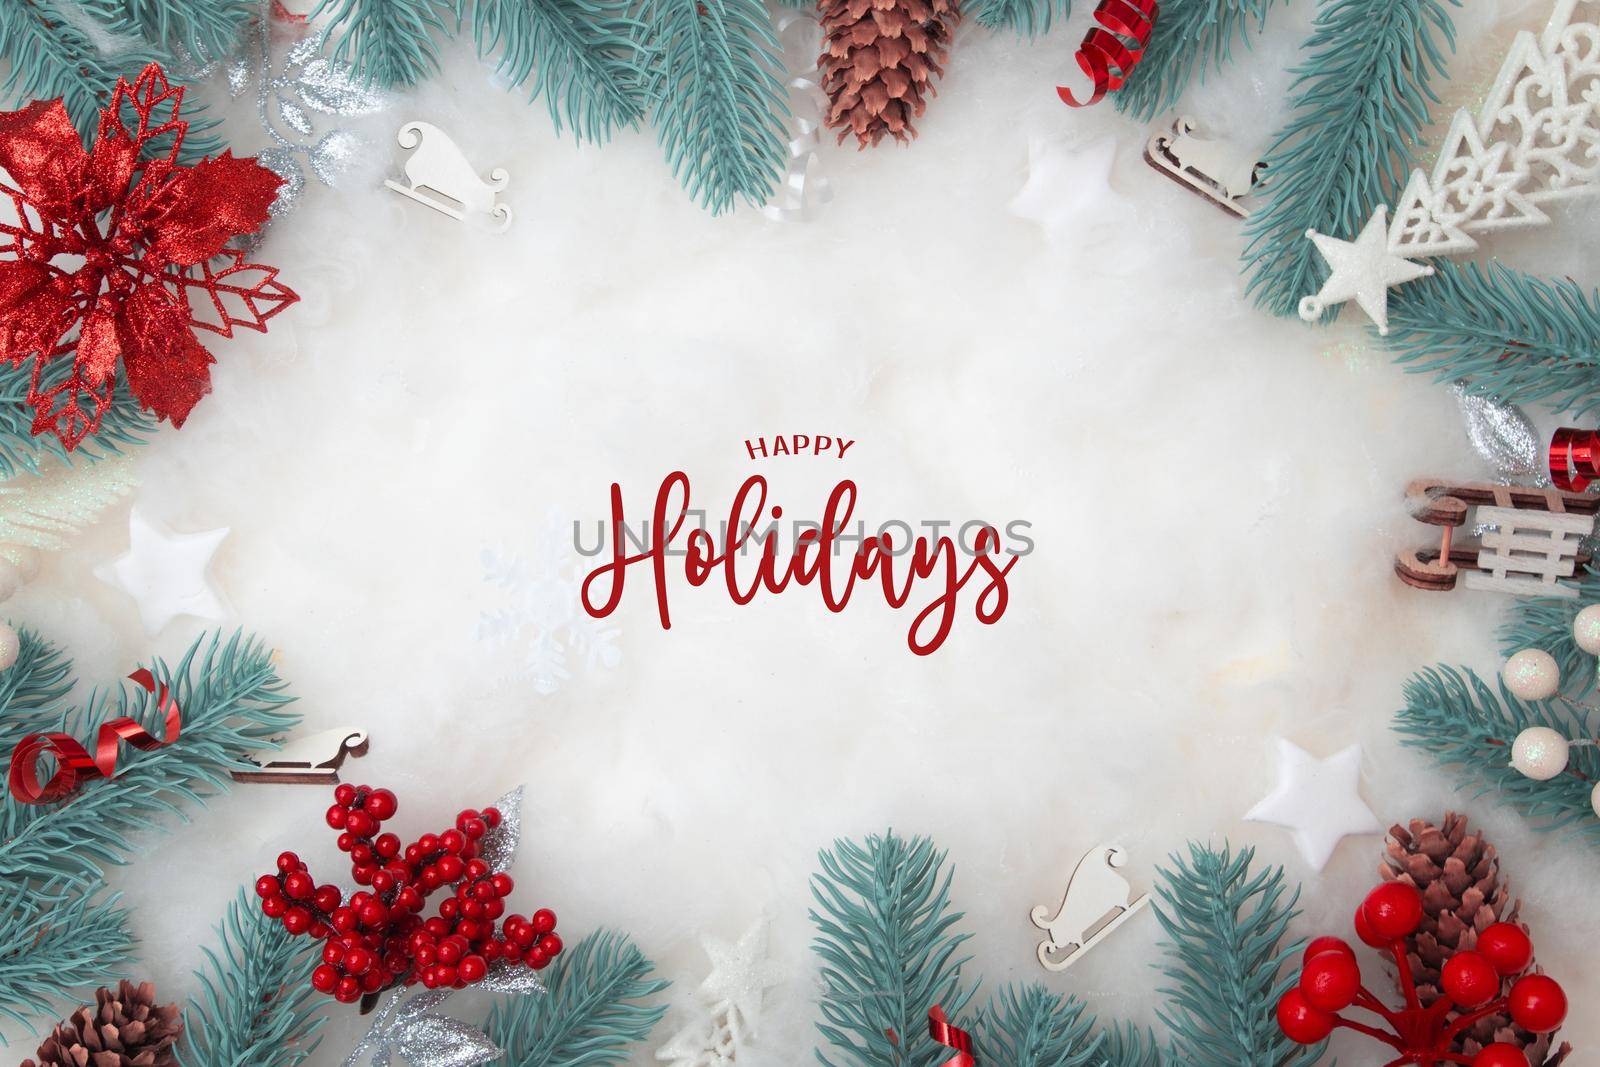 Happy Holidays text with frame made of Christmas decorations flat lay on a snowy background with copy space